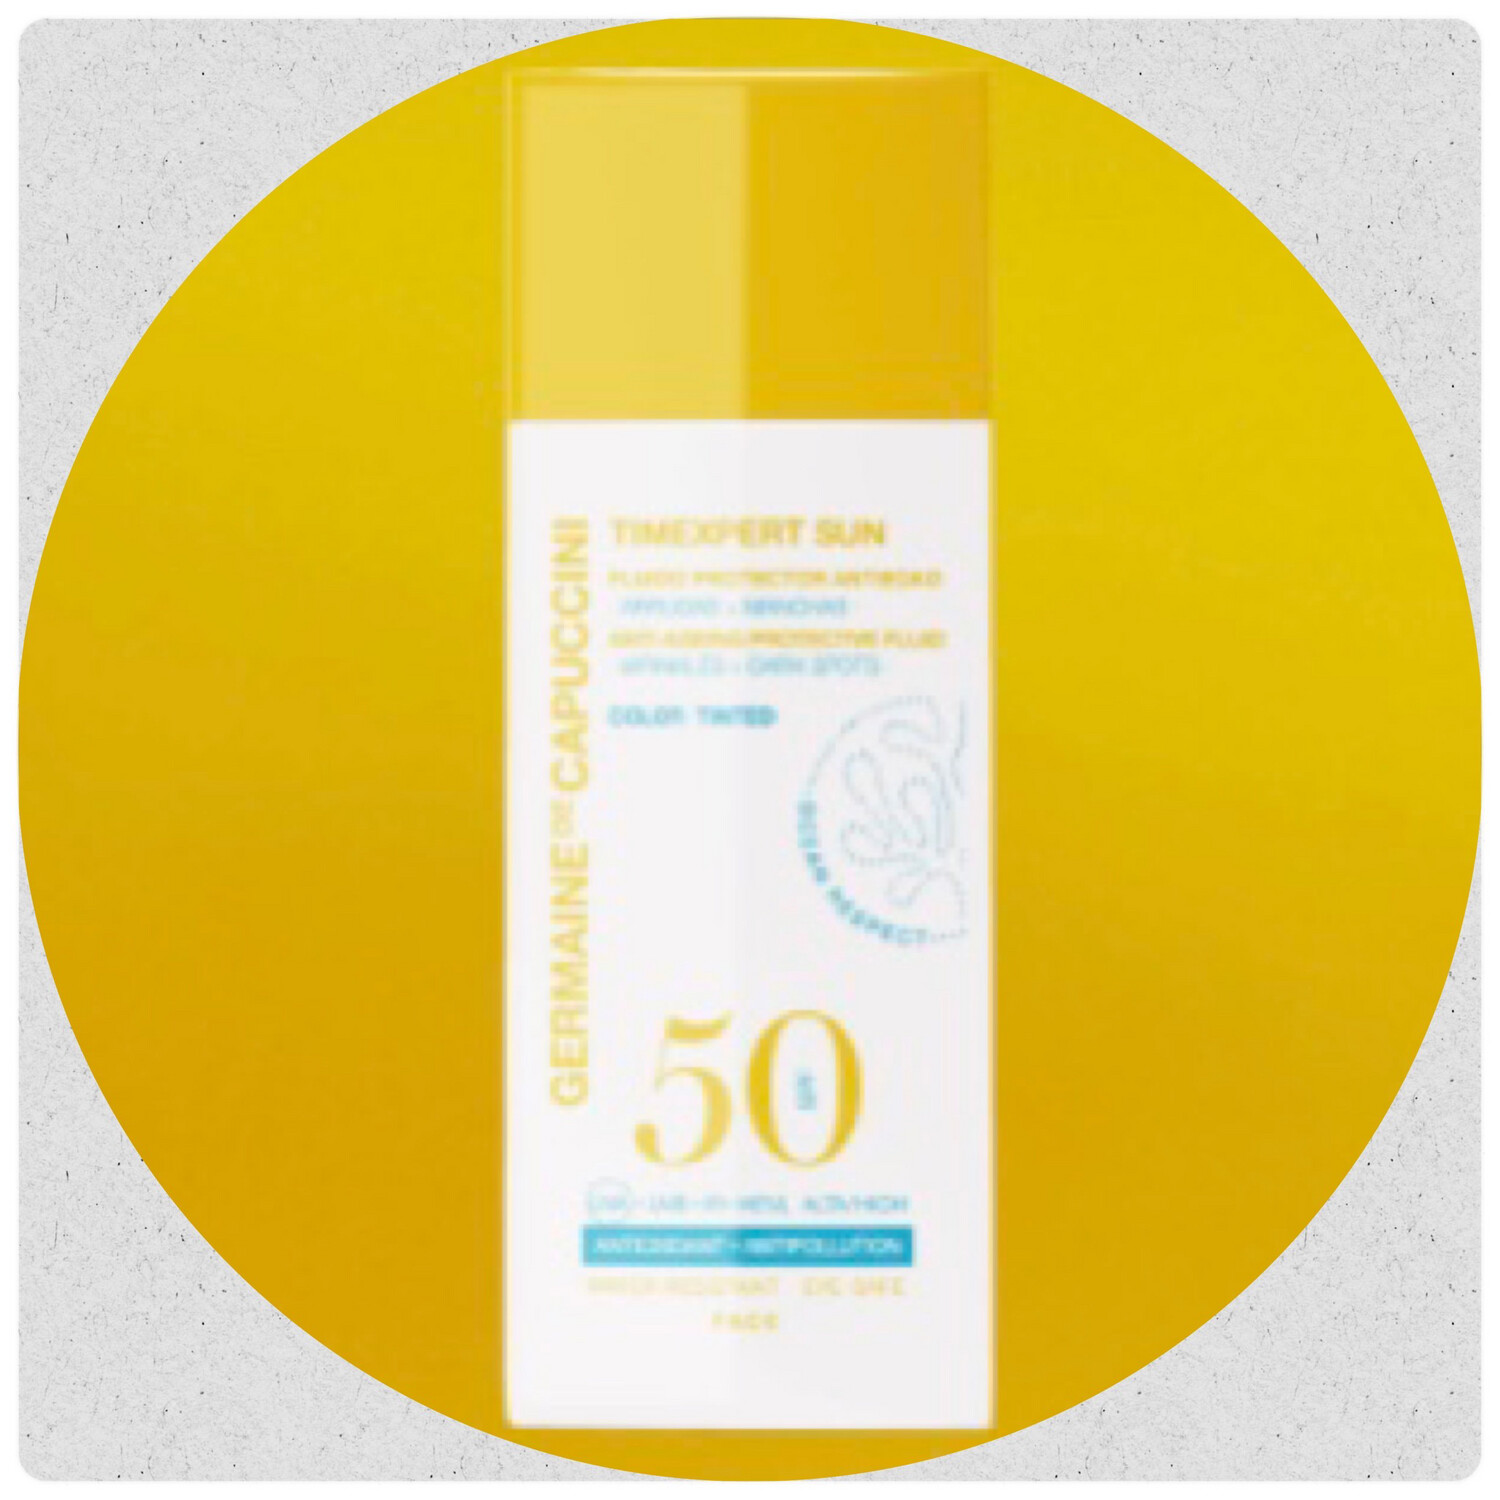 Anti-Ageing GdC SPF50 - Tinted